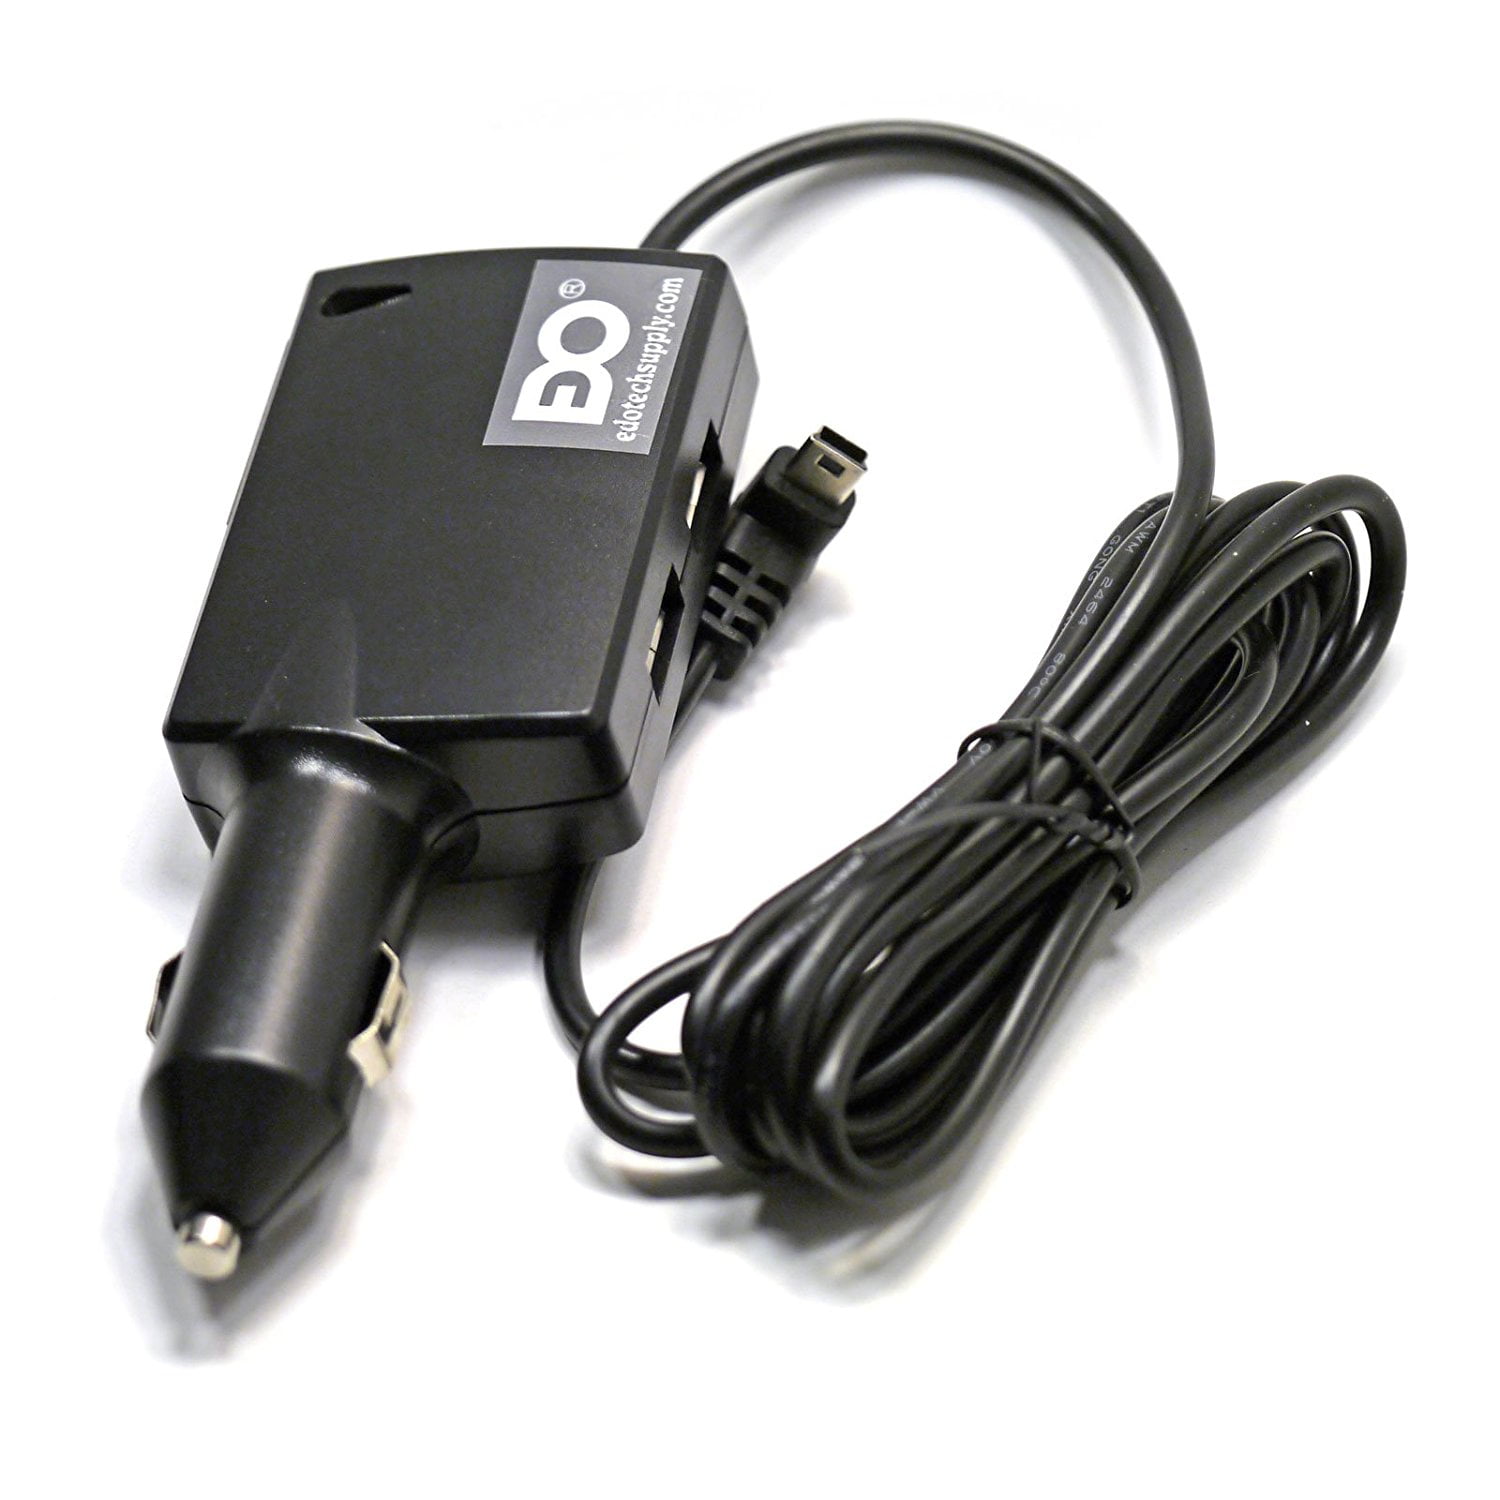 Fuse Protected Volt Plus Tech Heavy Duty Car Charger for Tomtom Go 920T to Plug-in and GO! 